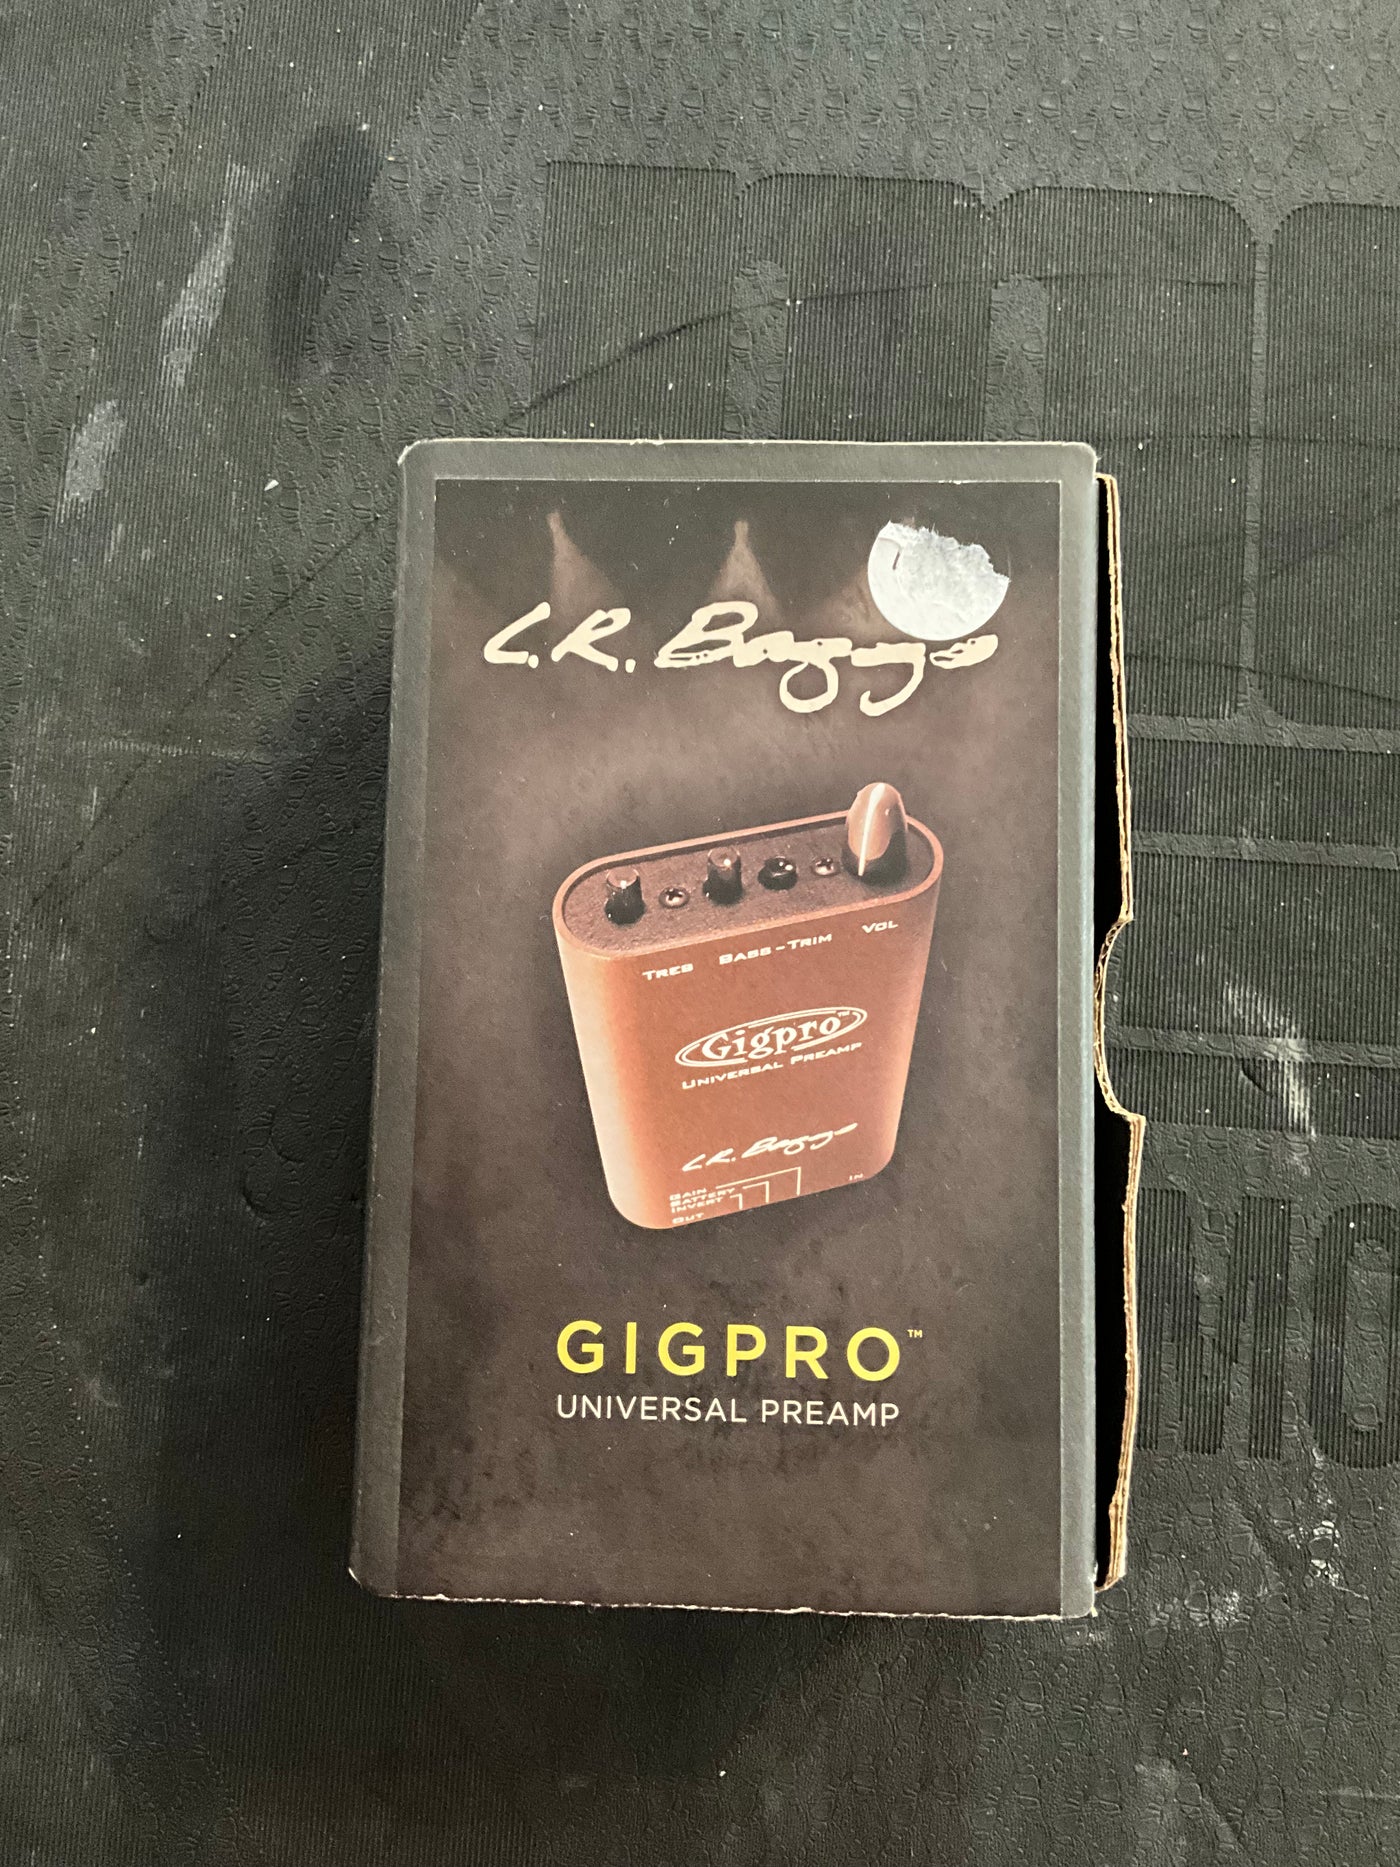 LR Baggs Gig Pro Acoustic Preamp